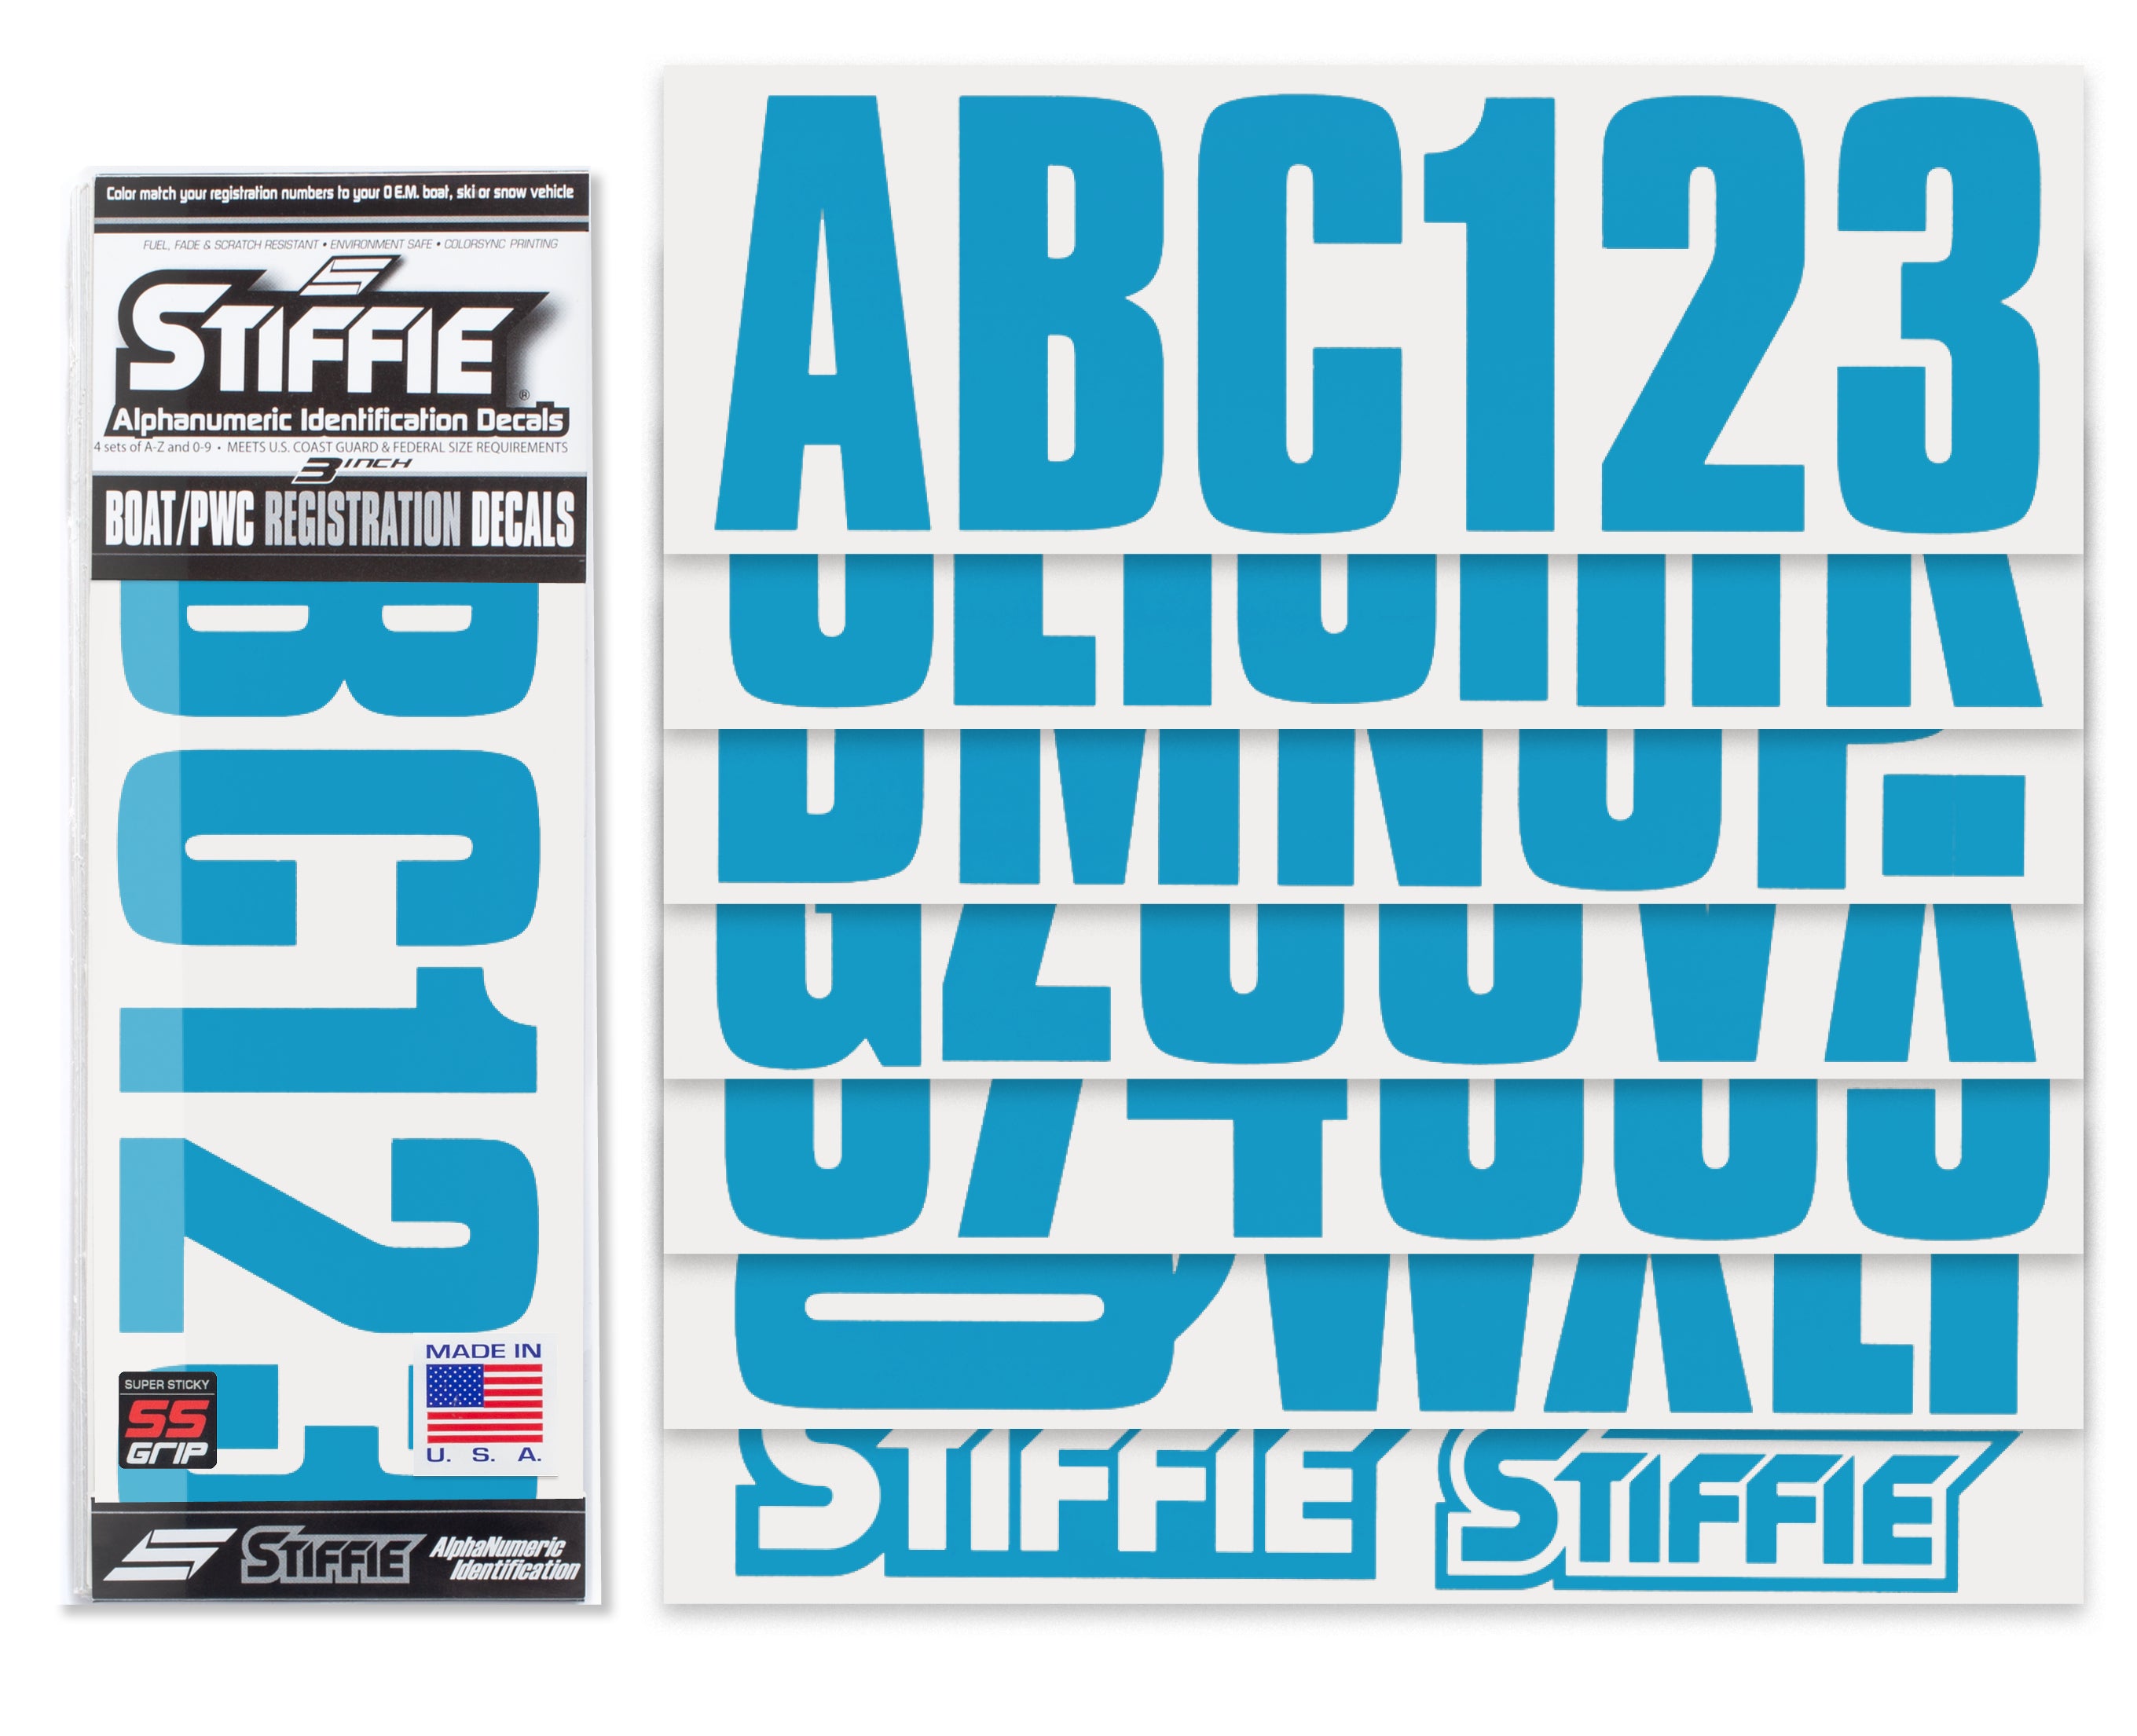 STIFFIE Uniline Blueberry Super Sticky 3" Alpha Numeric Registration Identification Numbers Stickers Decals for Sea-Doo Spark, Inflatable Boats, Ribs, Hypalon/PVC, PWC and Boats